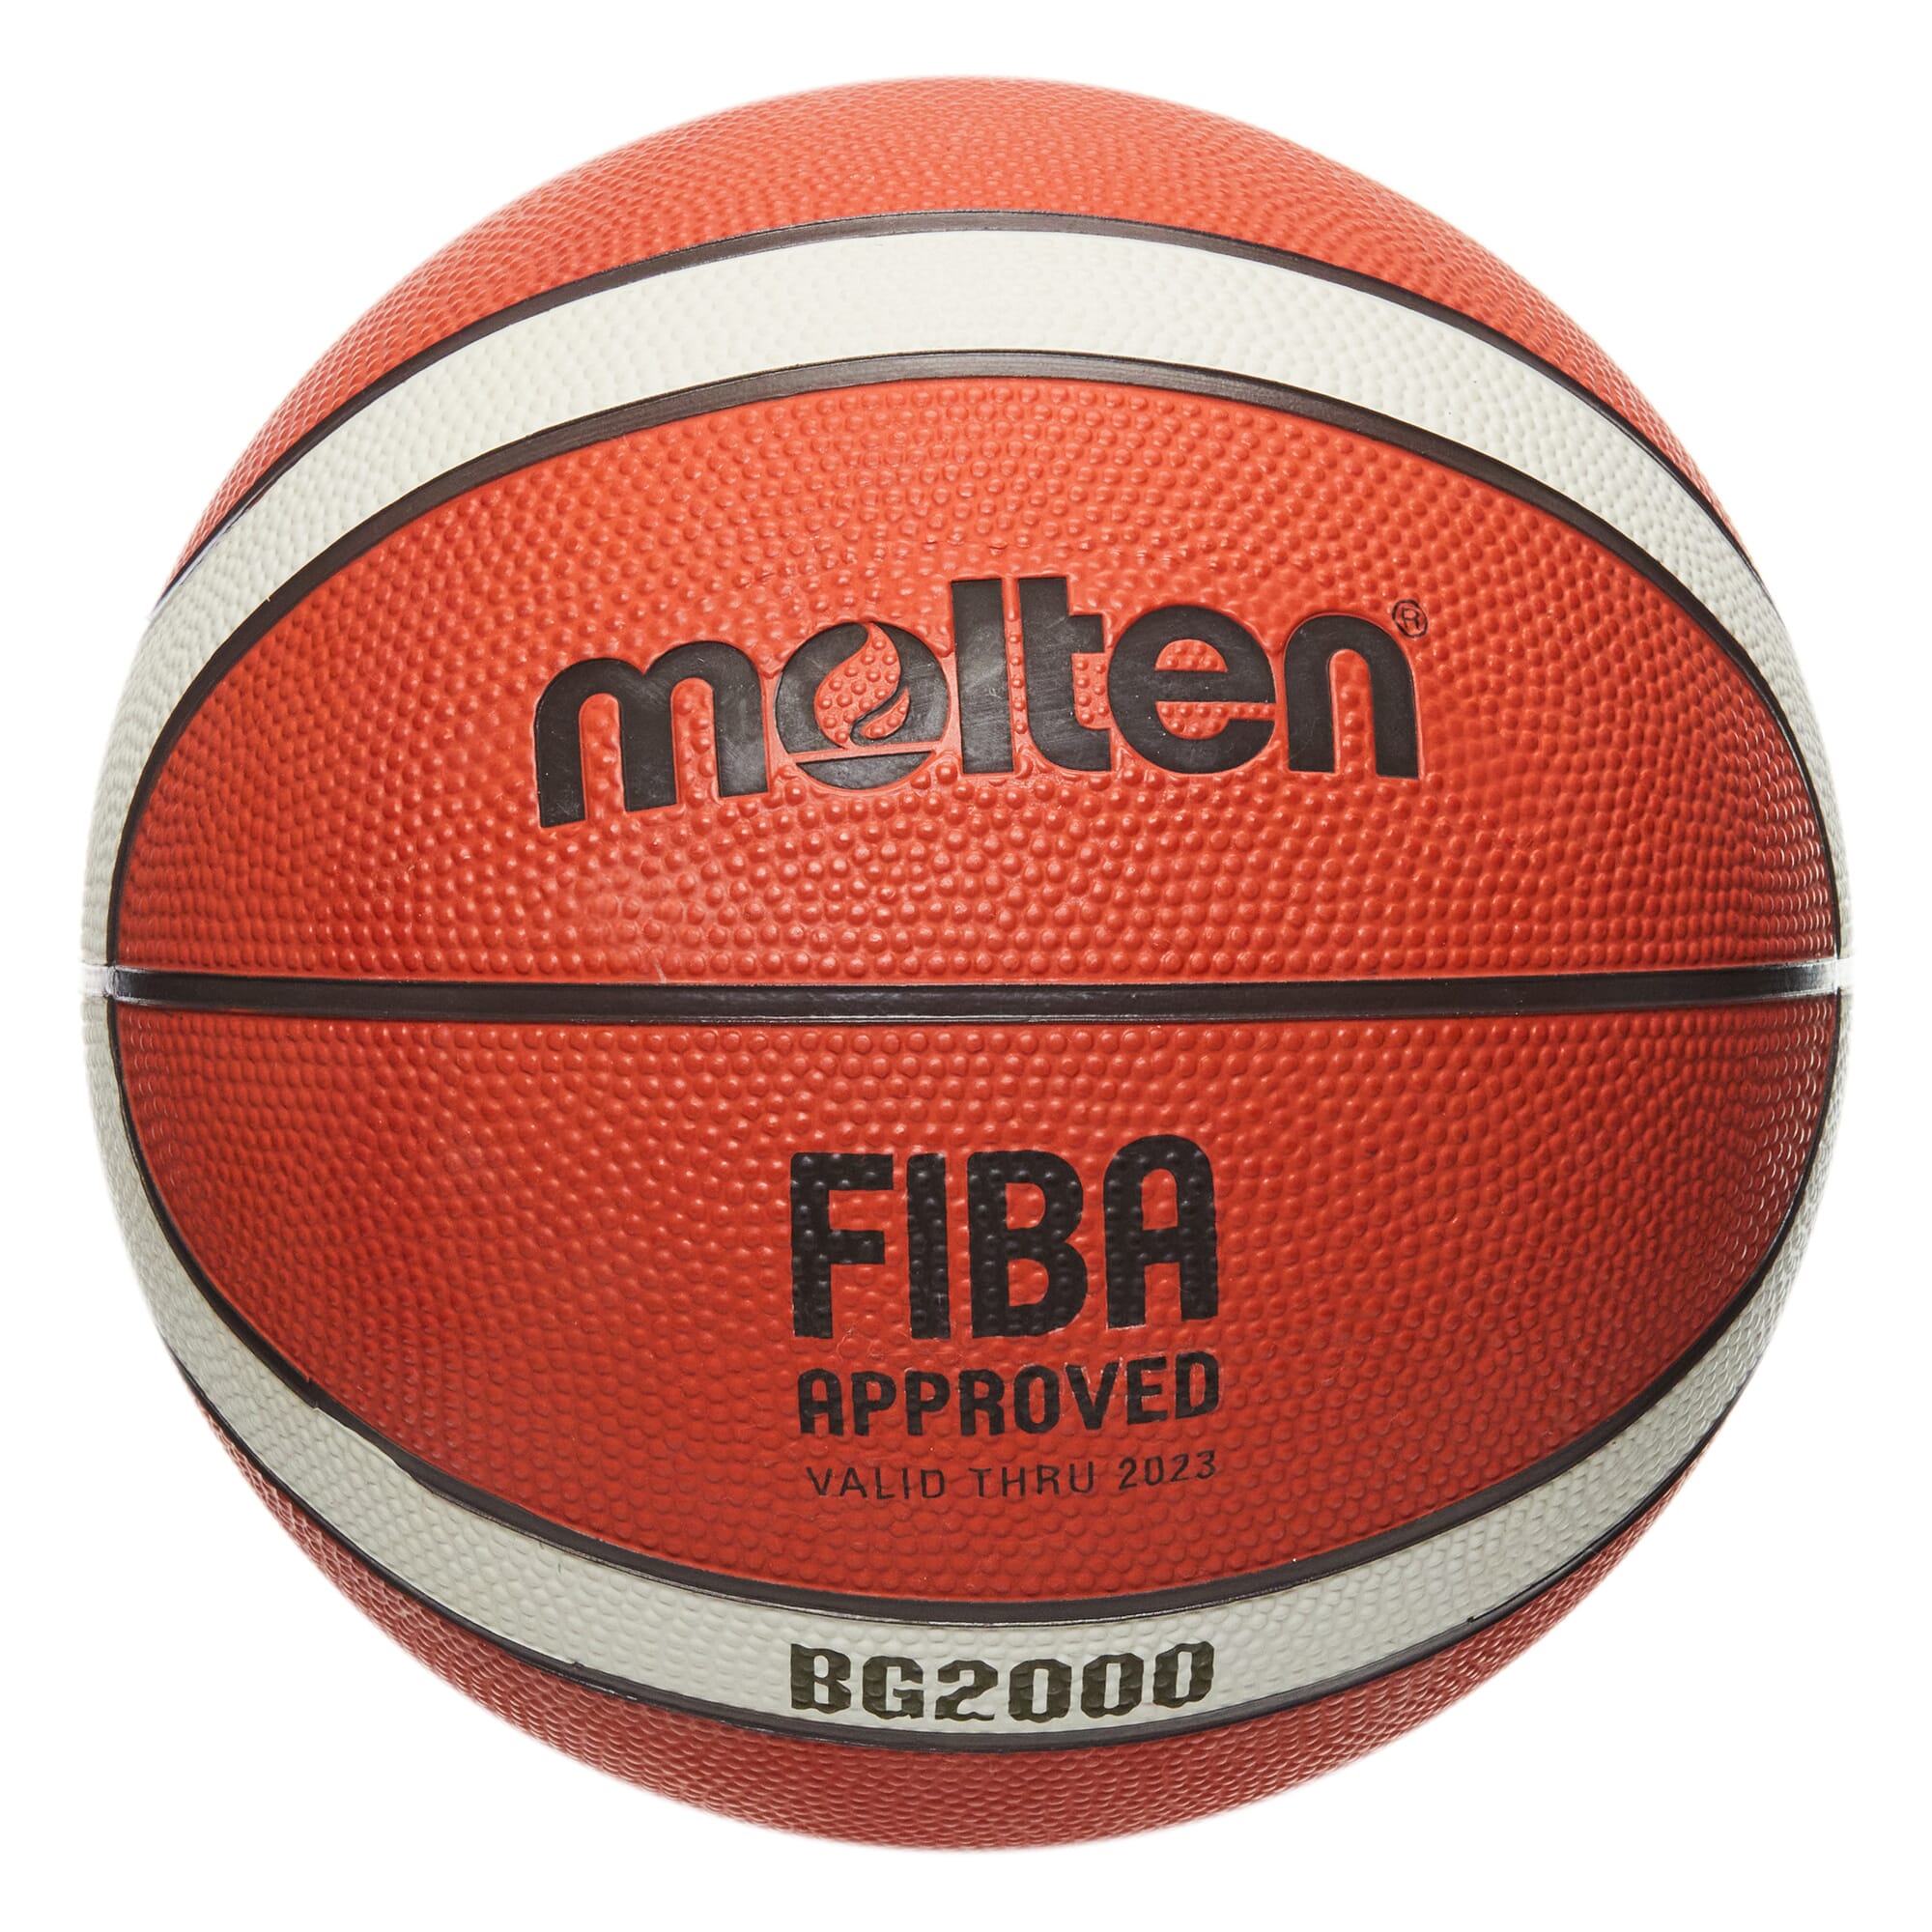 MOLTEN BASKETBALL SIZE 6 GR6 FIBA APPROVED OUTDOOR/INDOOR SIZE 6 